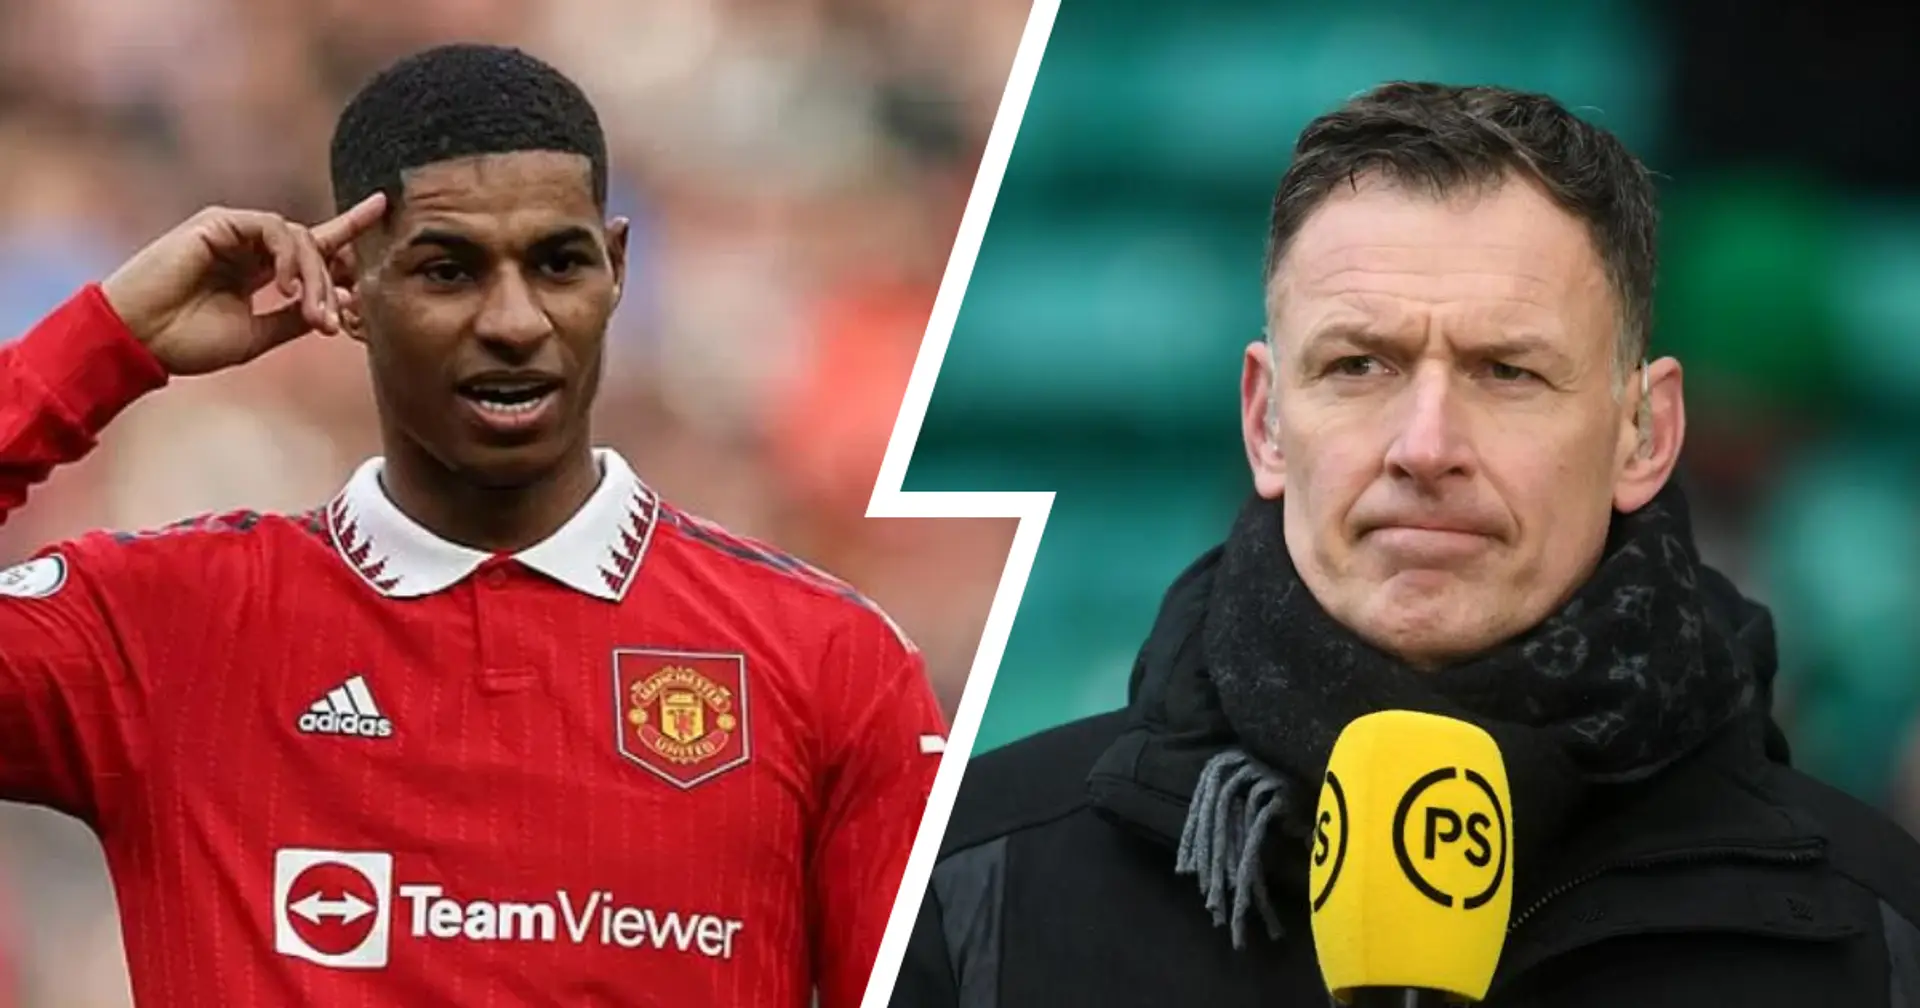 'I don't think Liverpool will keep Rashford out': Chris Sutton makes prediction ahead of Sunday's clash